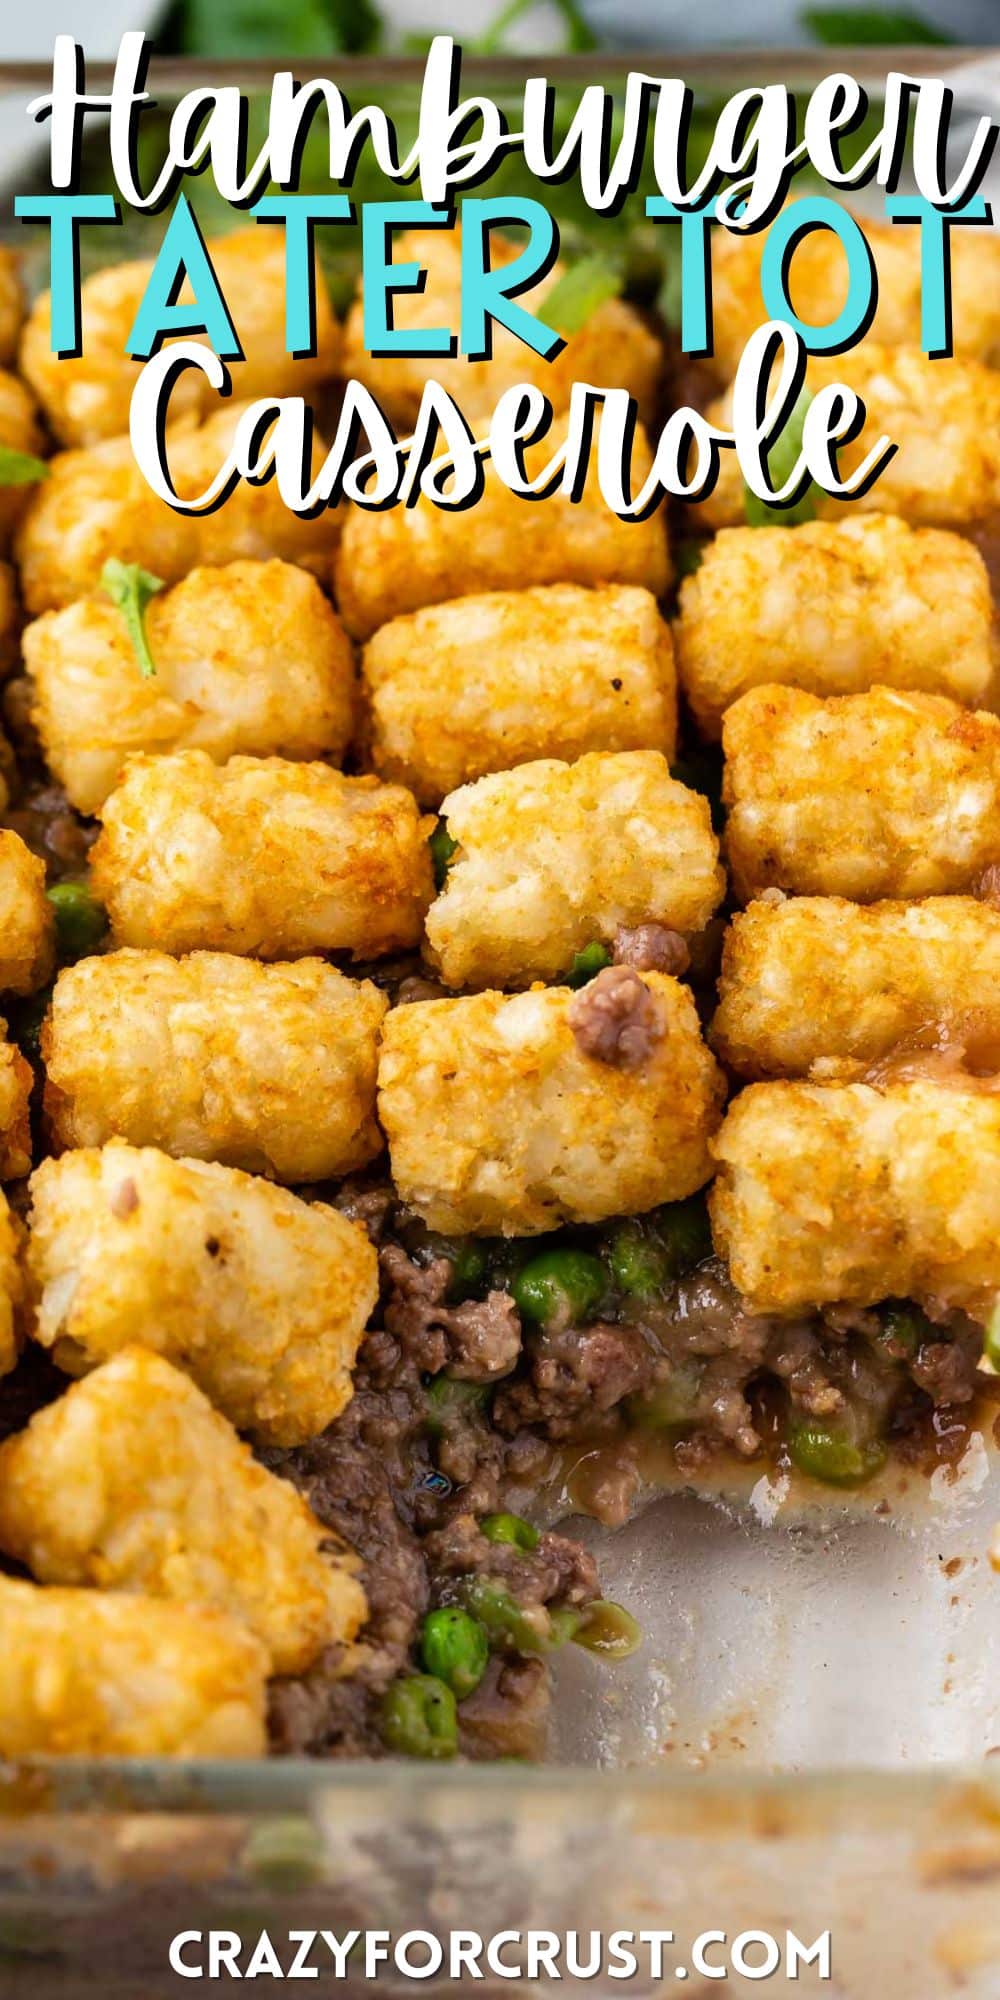 meat casserole with tater tots layered on top with words on the image.